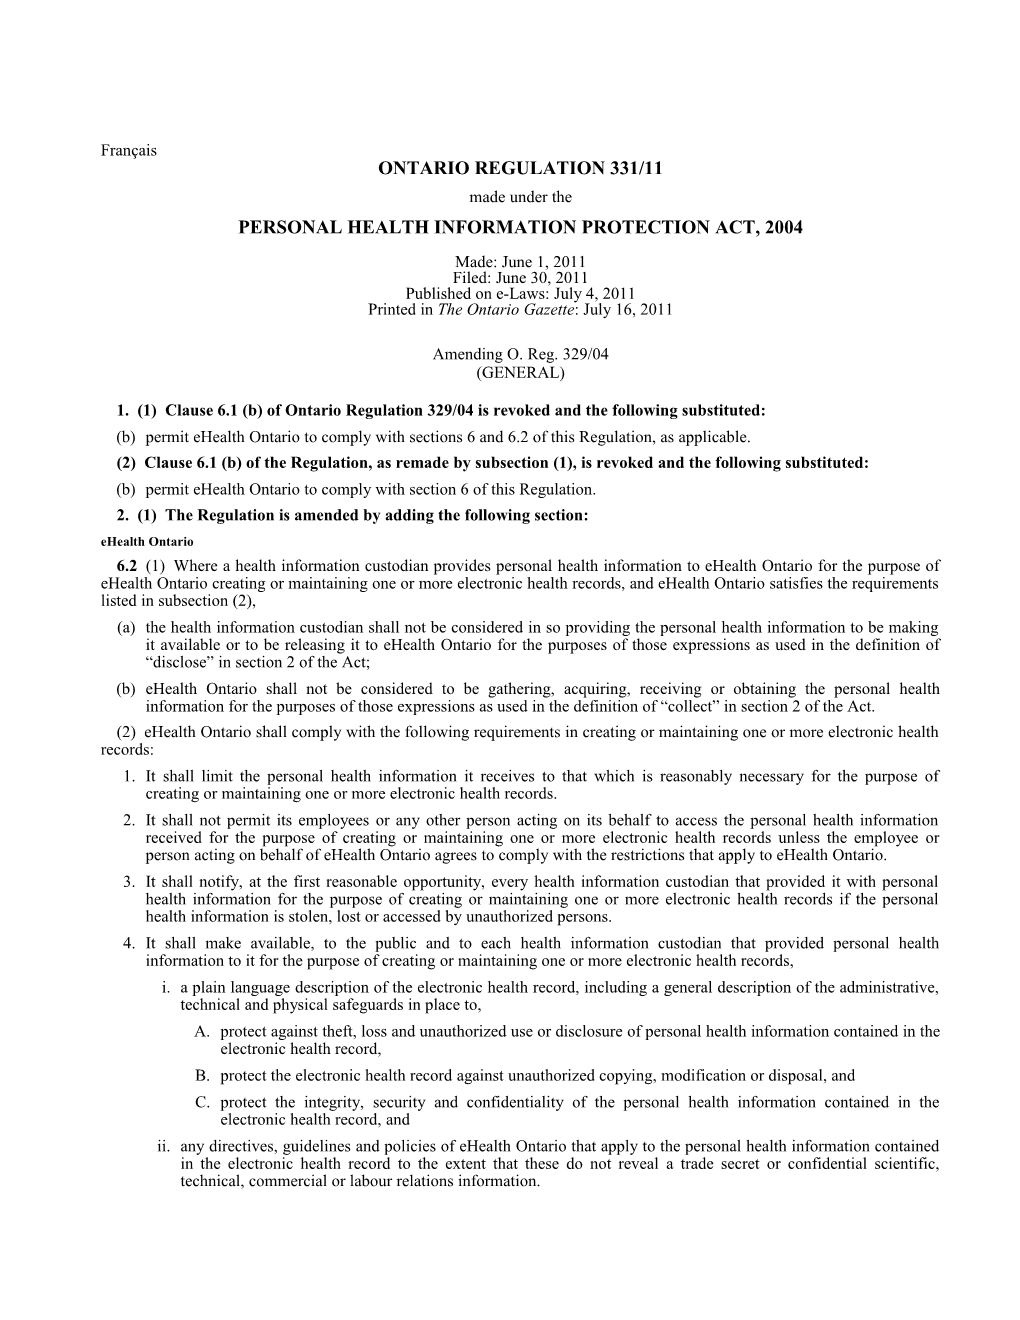 PERSONAL HEALTH INFORMATION PROTECTION ACT, 2004 - O. Reg. 331/11